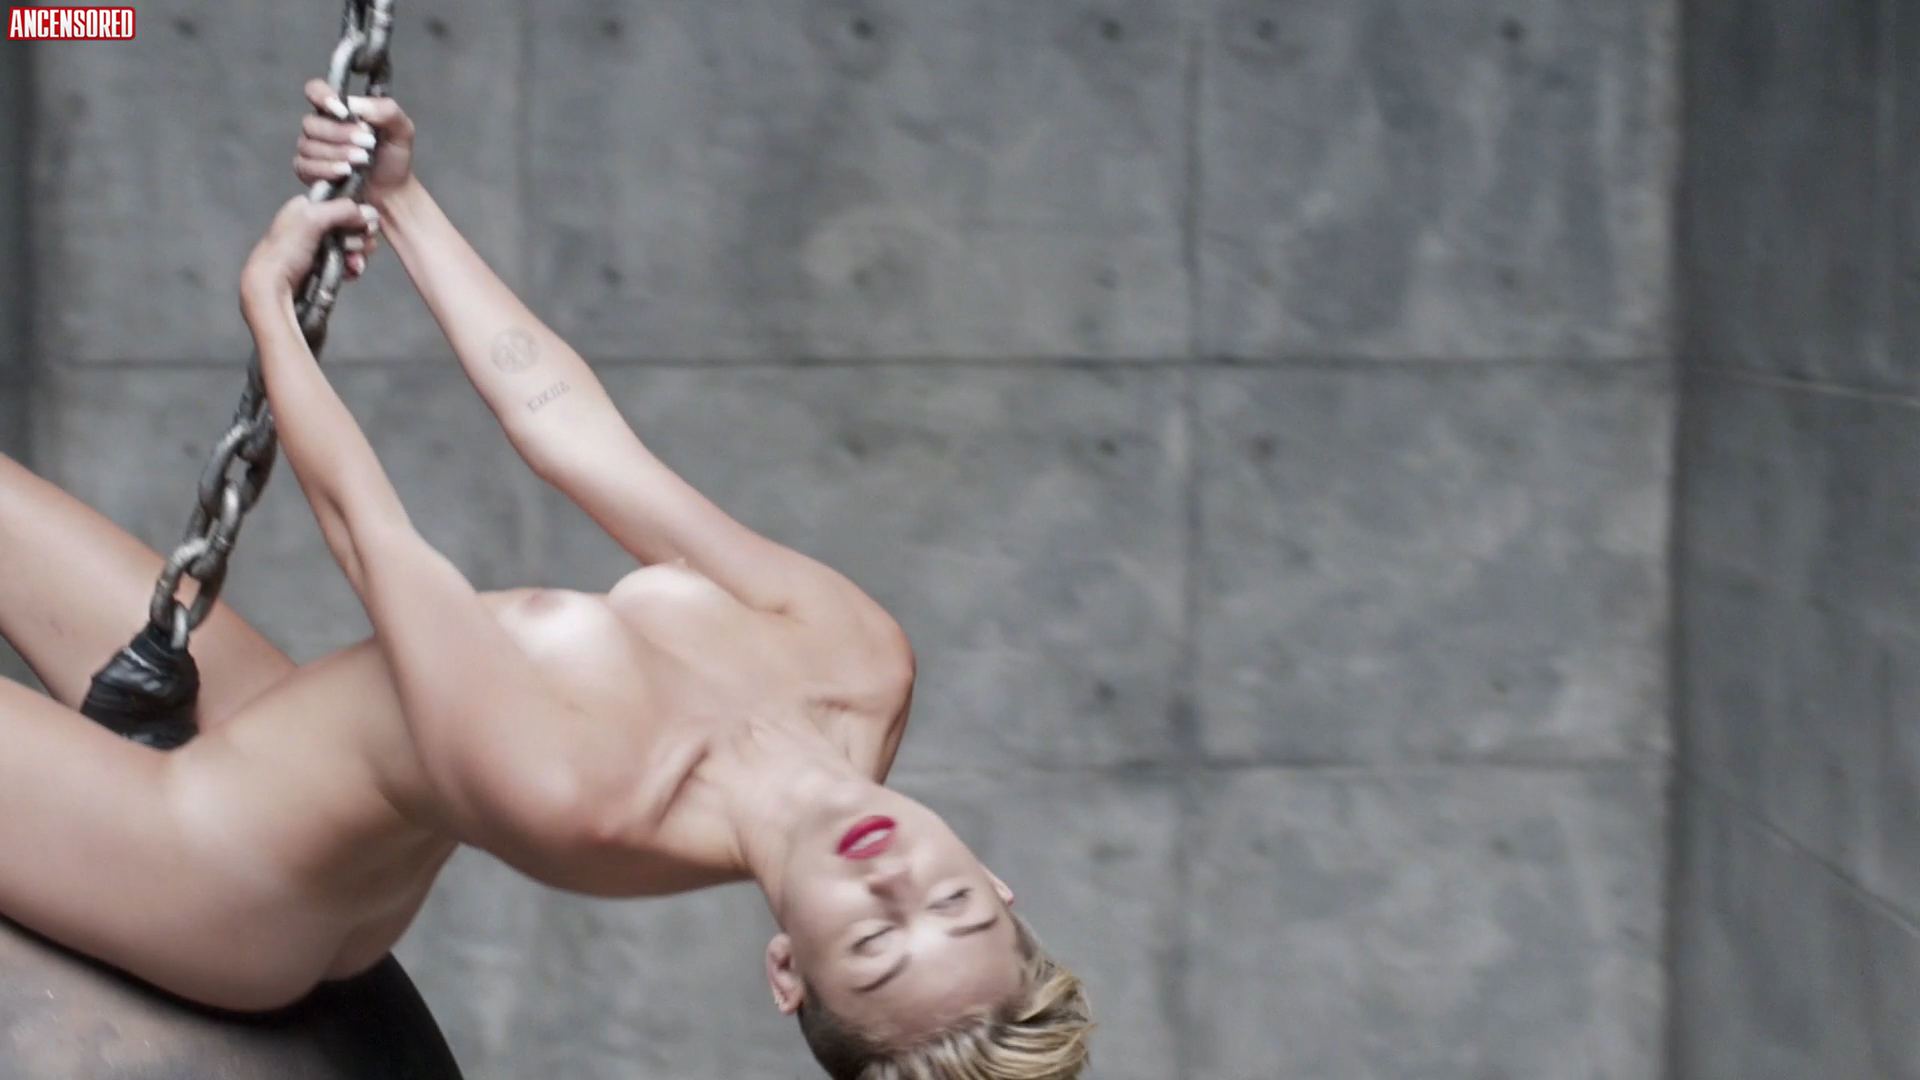 Miley Cyrus in Wrecking Ball ANCENSORED. 